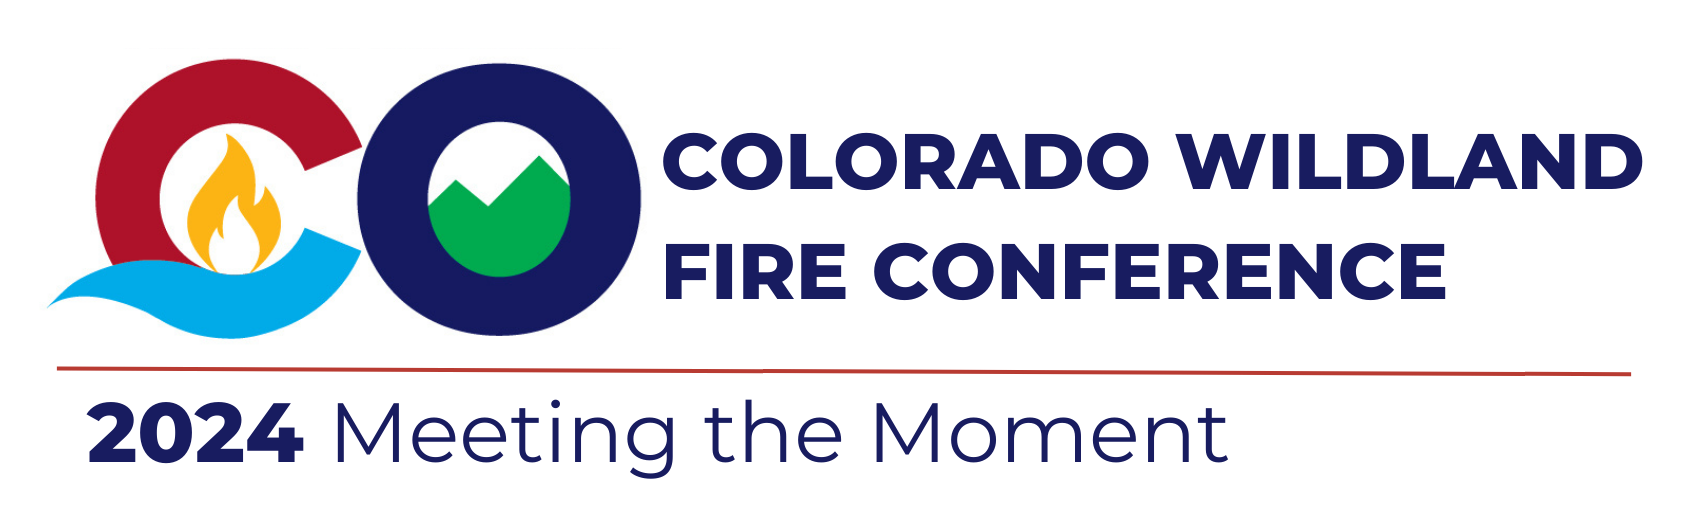 2024 Colorado Wildland Fire Conference; Meeting the Moment